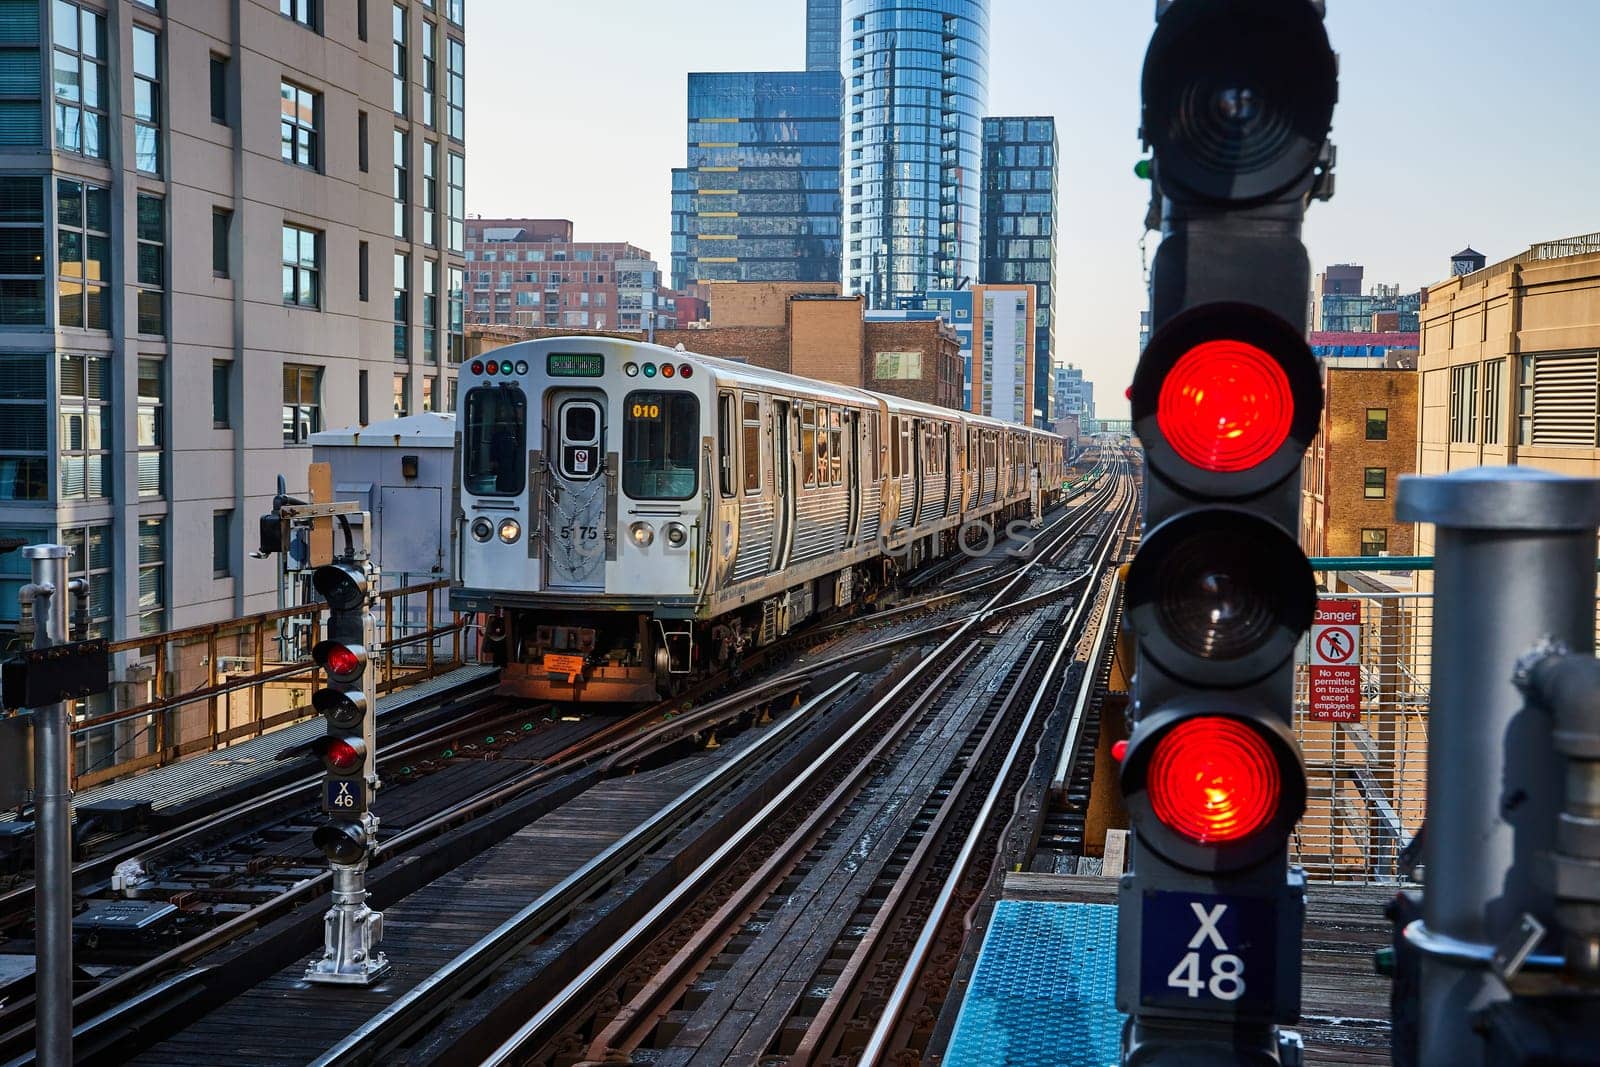 Commuter Train on Elevated Tracks in Urban Chicago, Traffic Signal in Foreground by njproductions